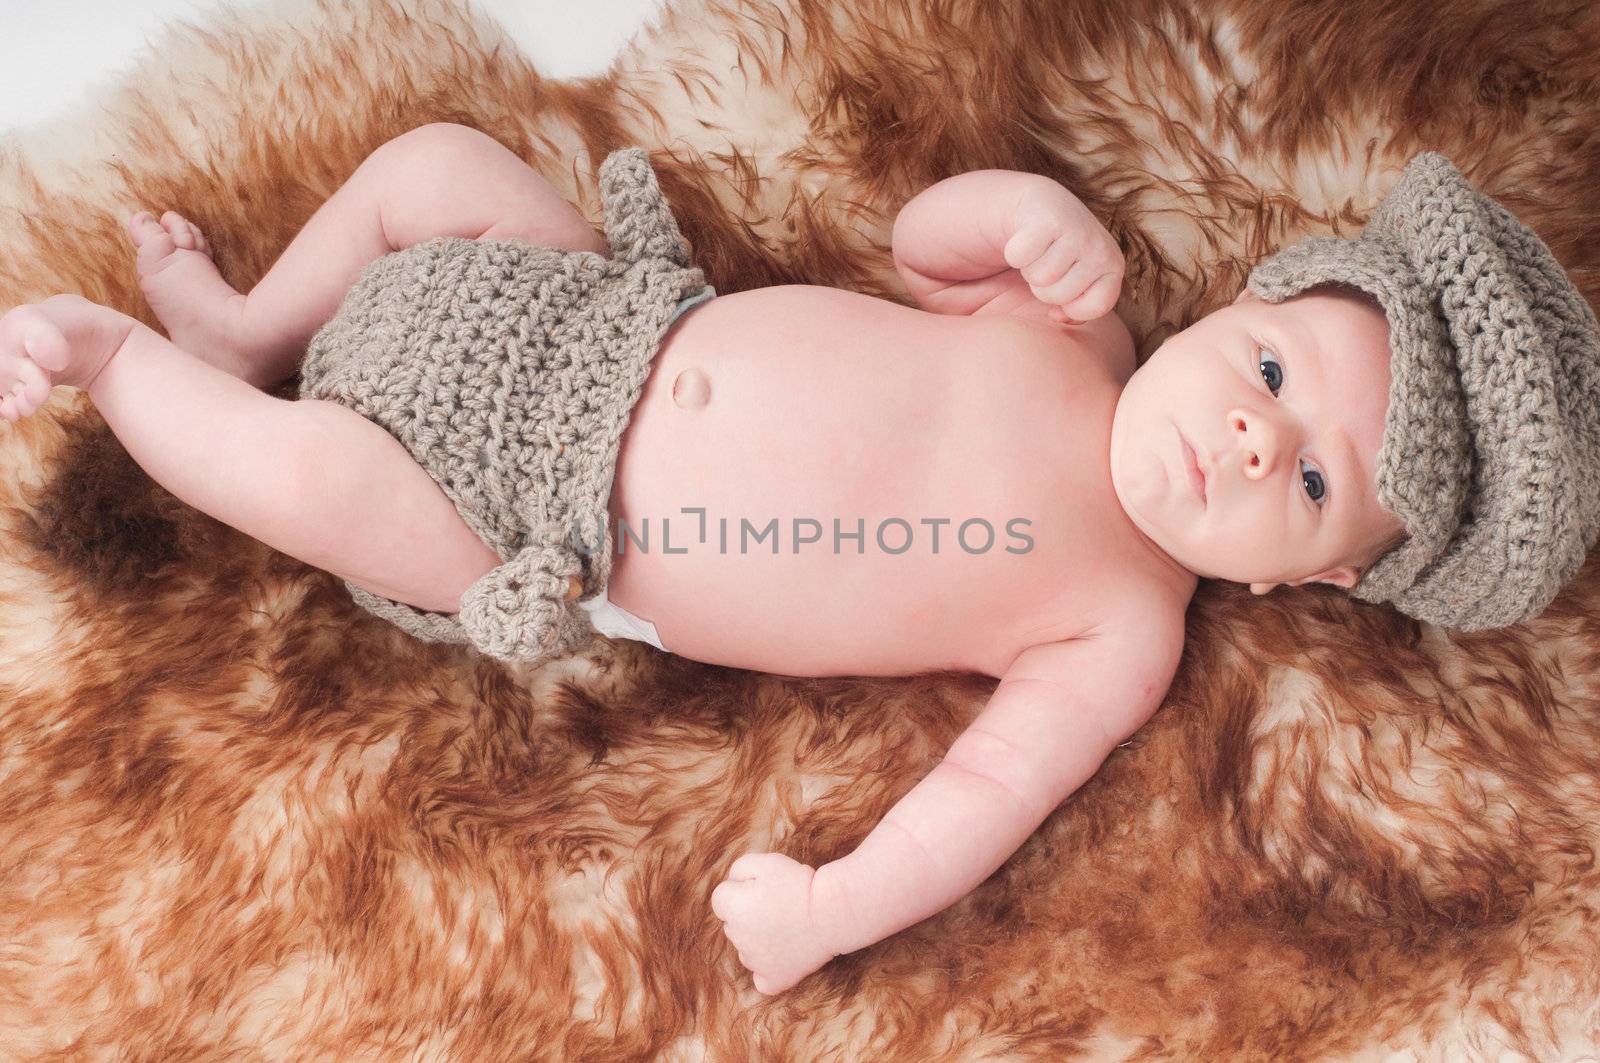 Shot of newborn baby in knitted gray clothes lying on fur